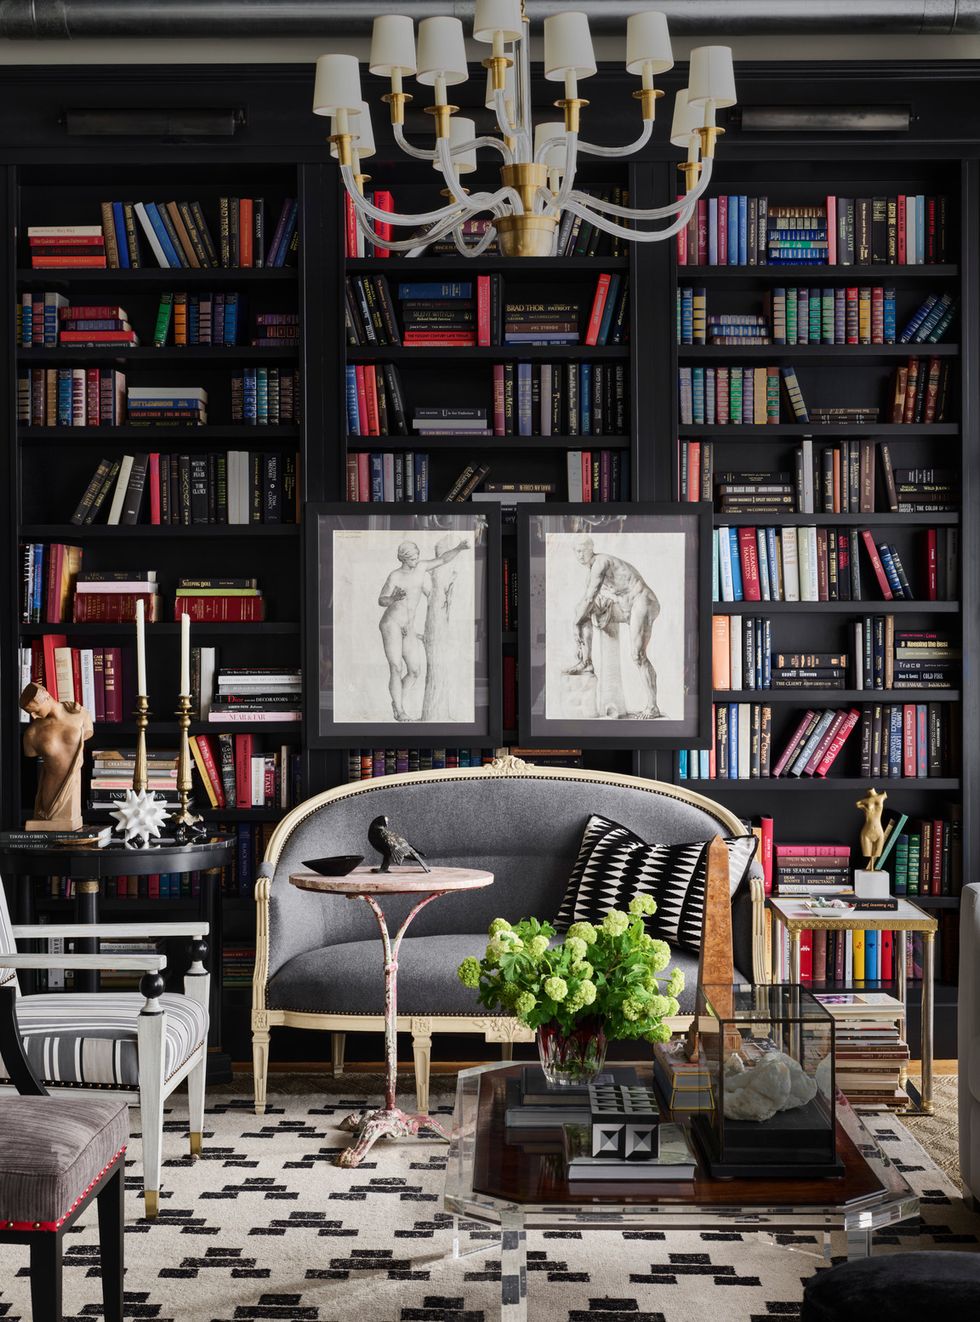 32 DIY Home Library Ideas - Best Reading Nook Ideas and Projects